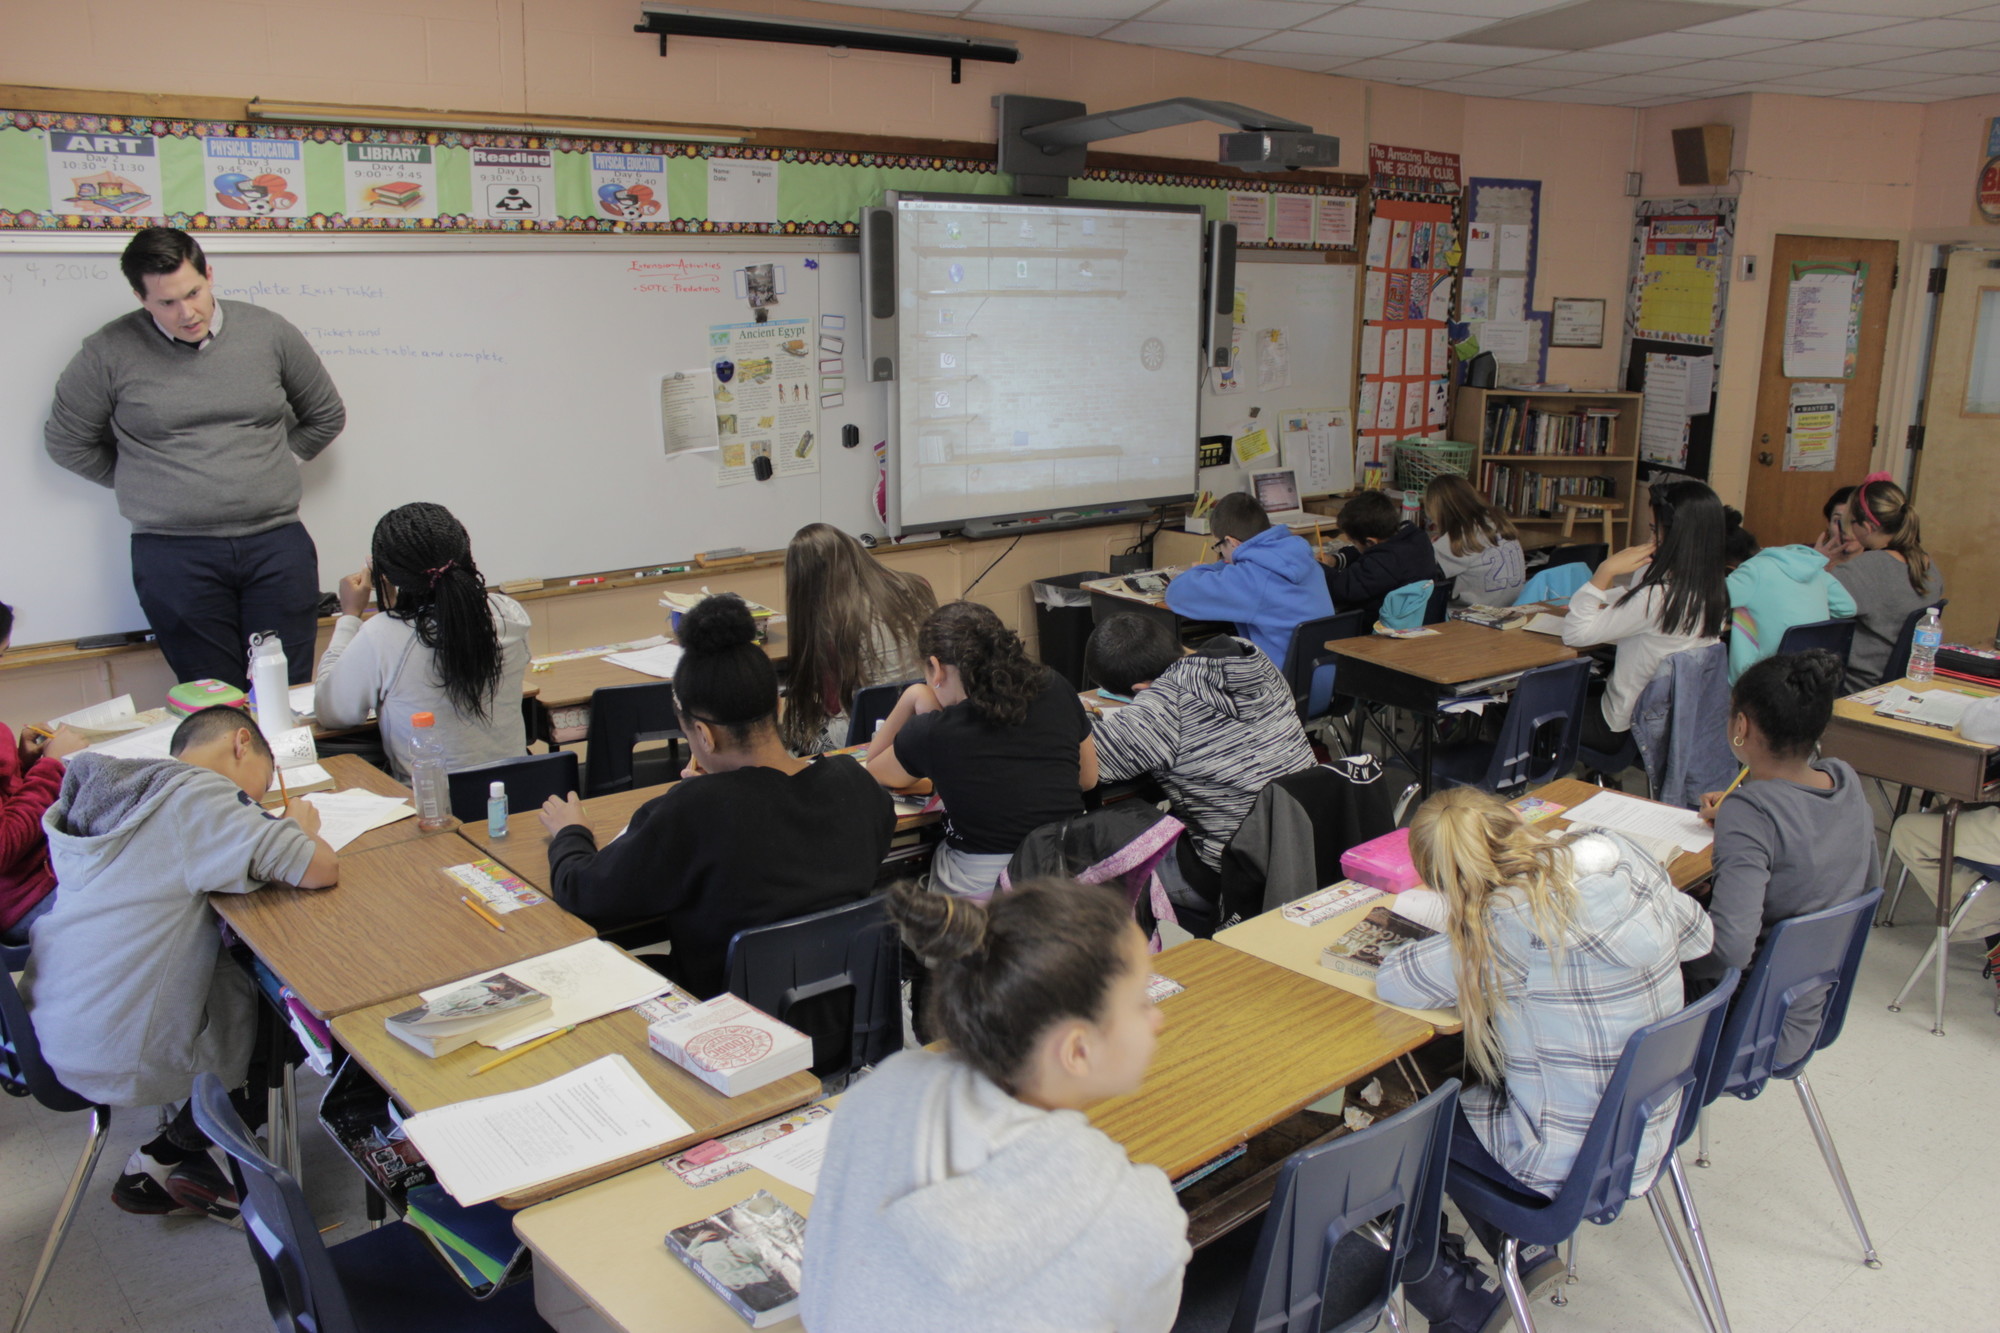 Sixth-graders in Joe Schumpf’s class at the William L. Buck School are tightly configured in a small classroom.